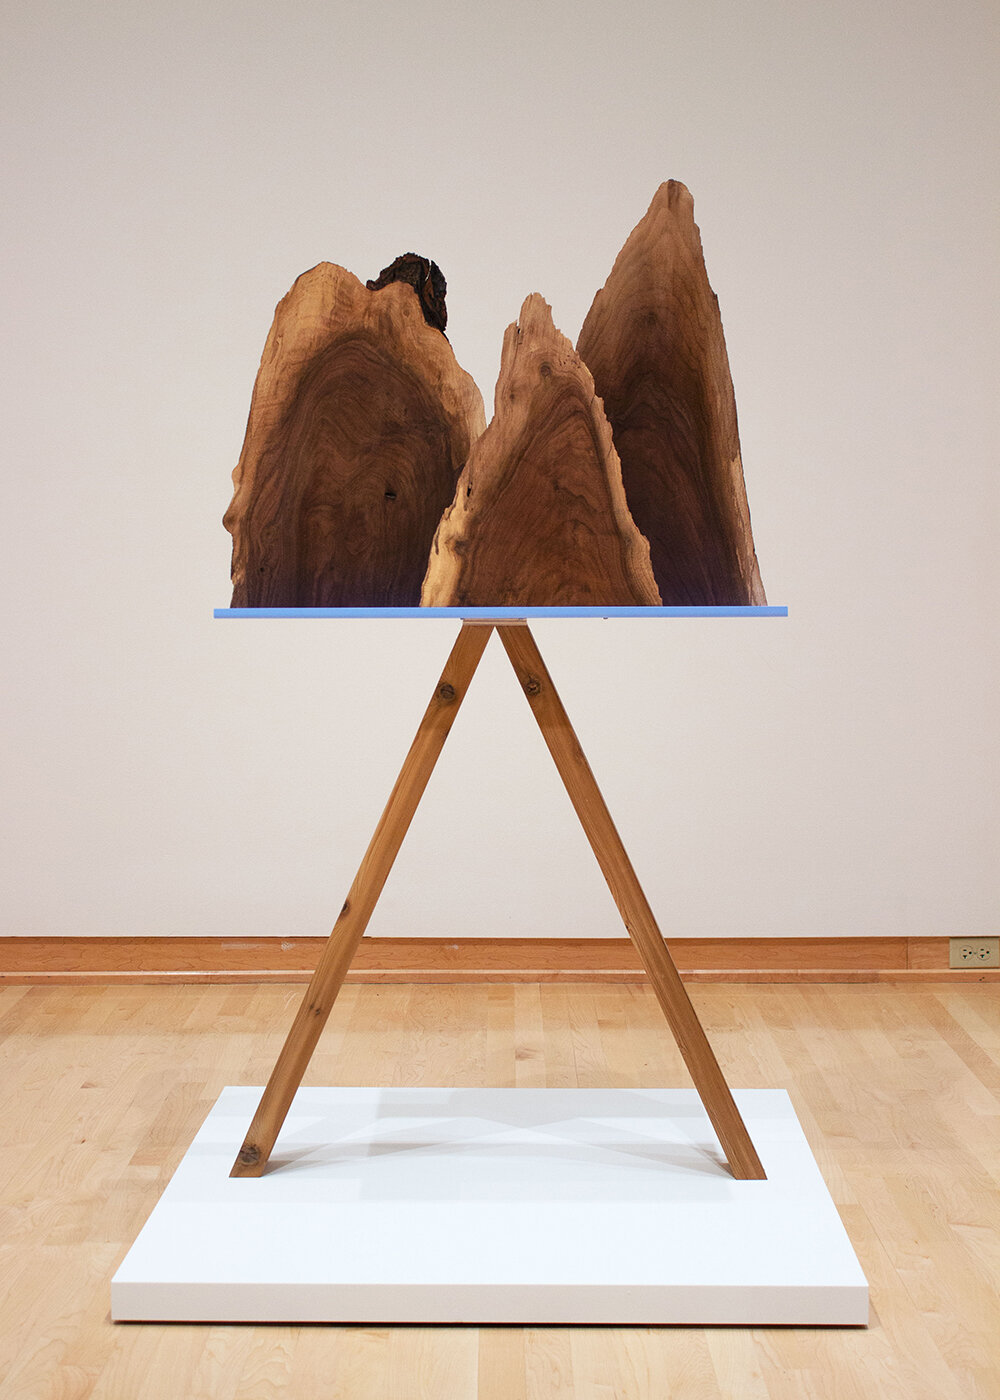  The Good Parts (mountains) Steel, paint, wood 59.5 x 32 x 10 inches Photo courtesy of John Michael Kohler Arts Center. 